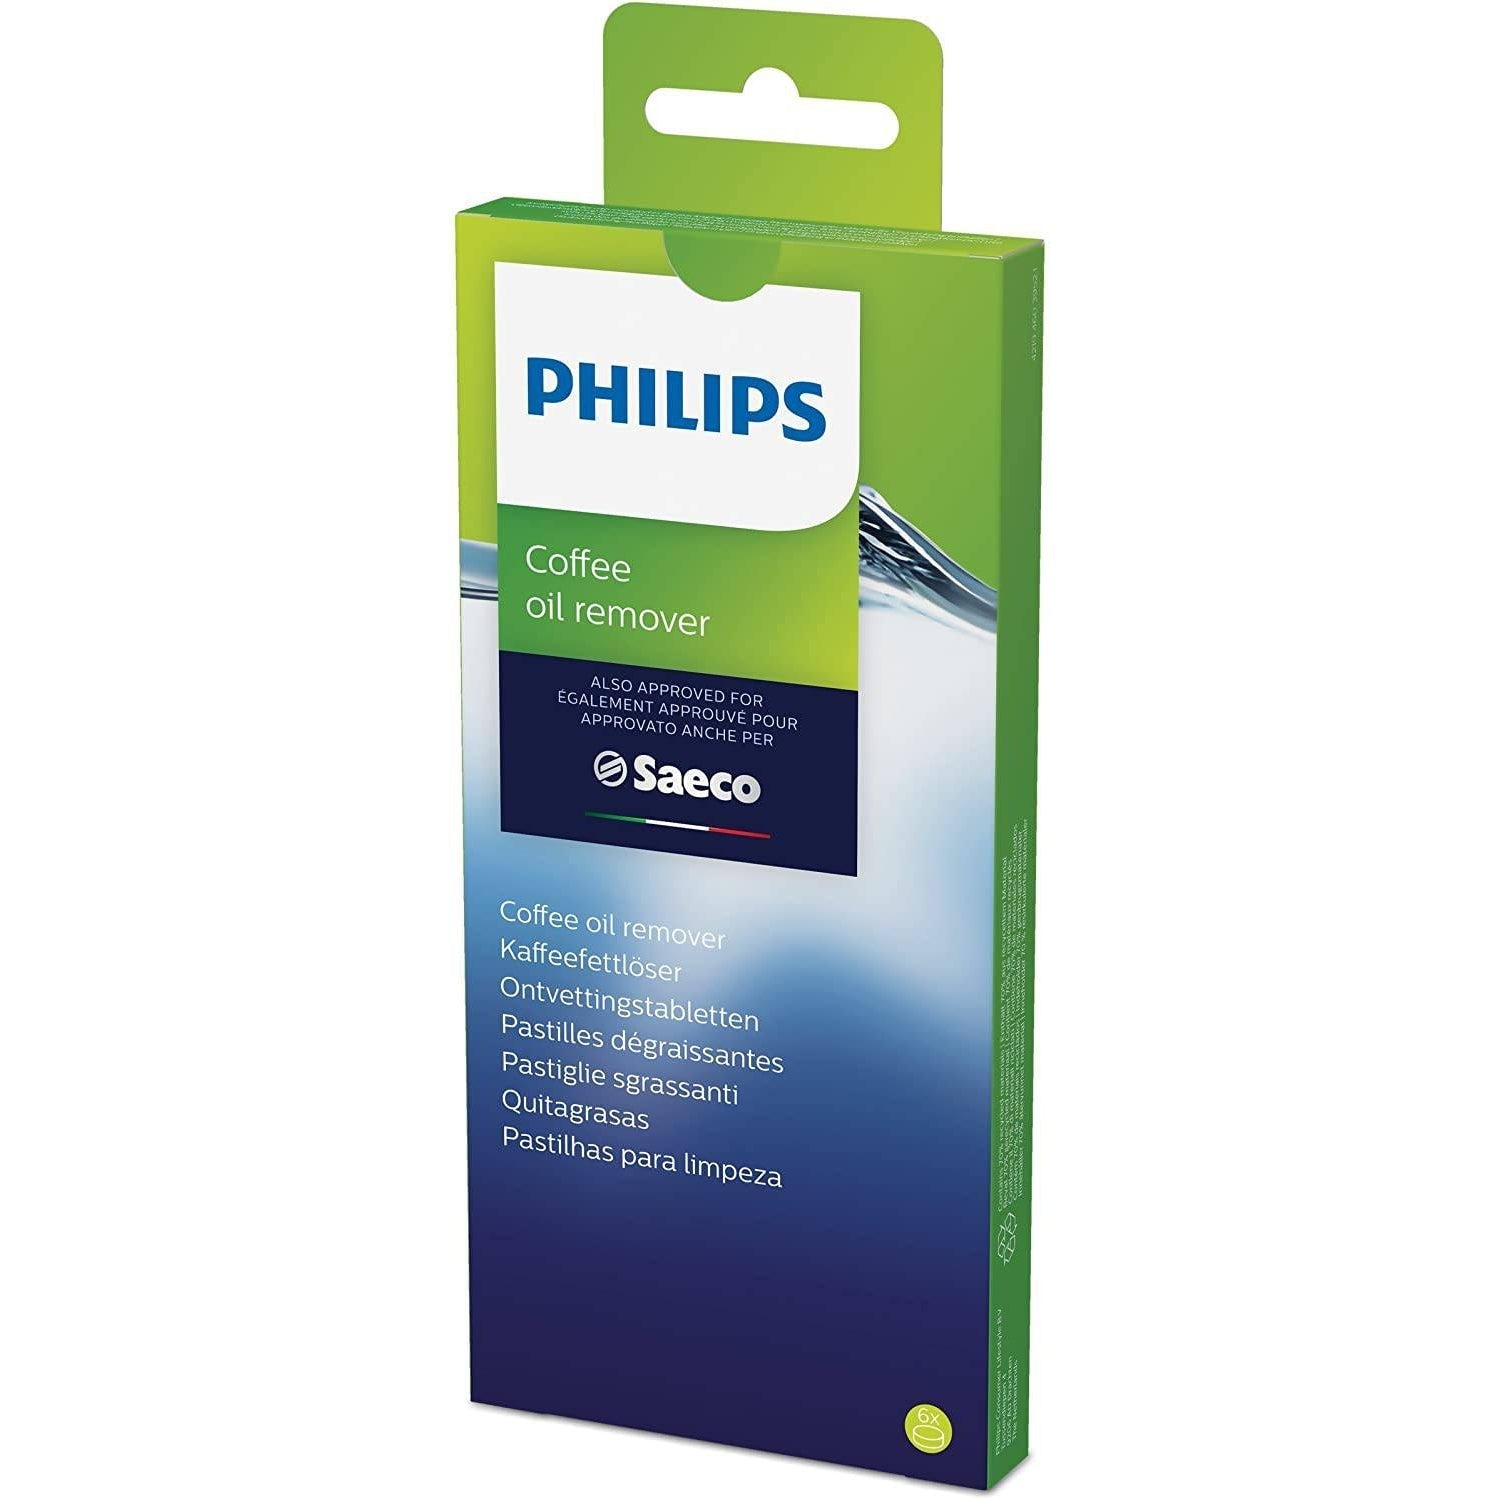 Philips CA6704/10 Coffee Fat Remover, 6 Tablets for Philips, Saeco and Other Fully Automatic Coffee Machines - Healthxpress.ie